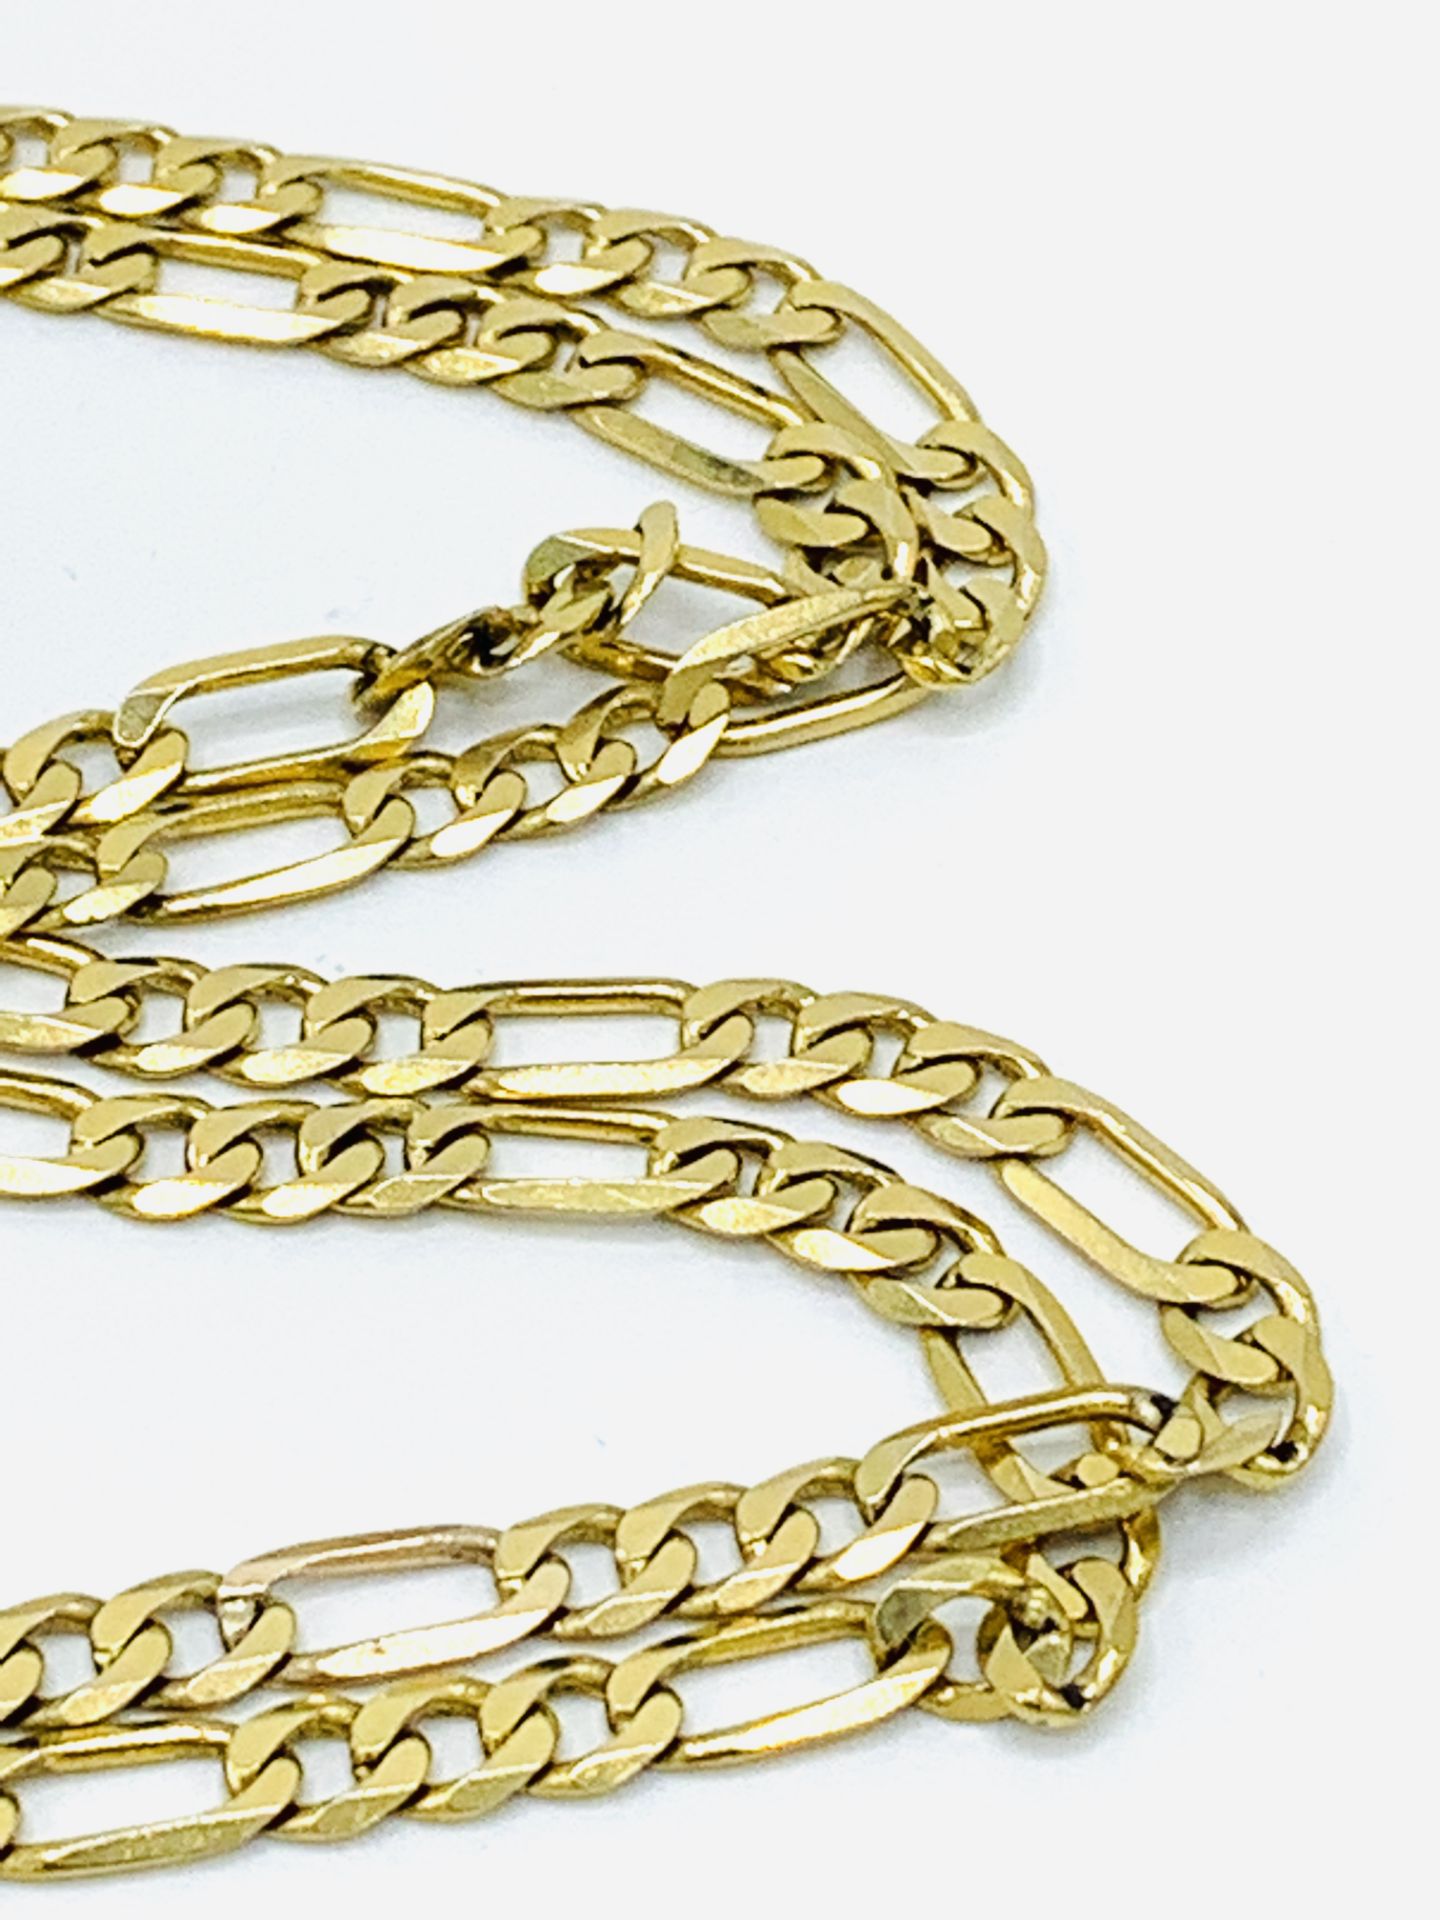 9ct gold flat link chain necklace. - Image 2 of 3